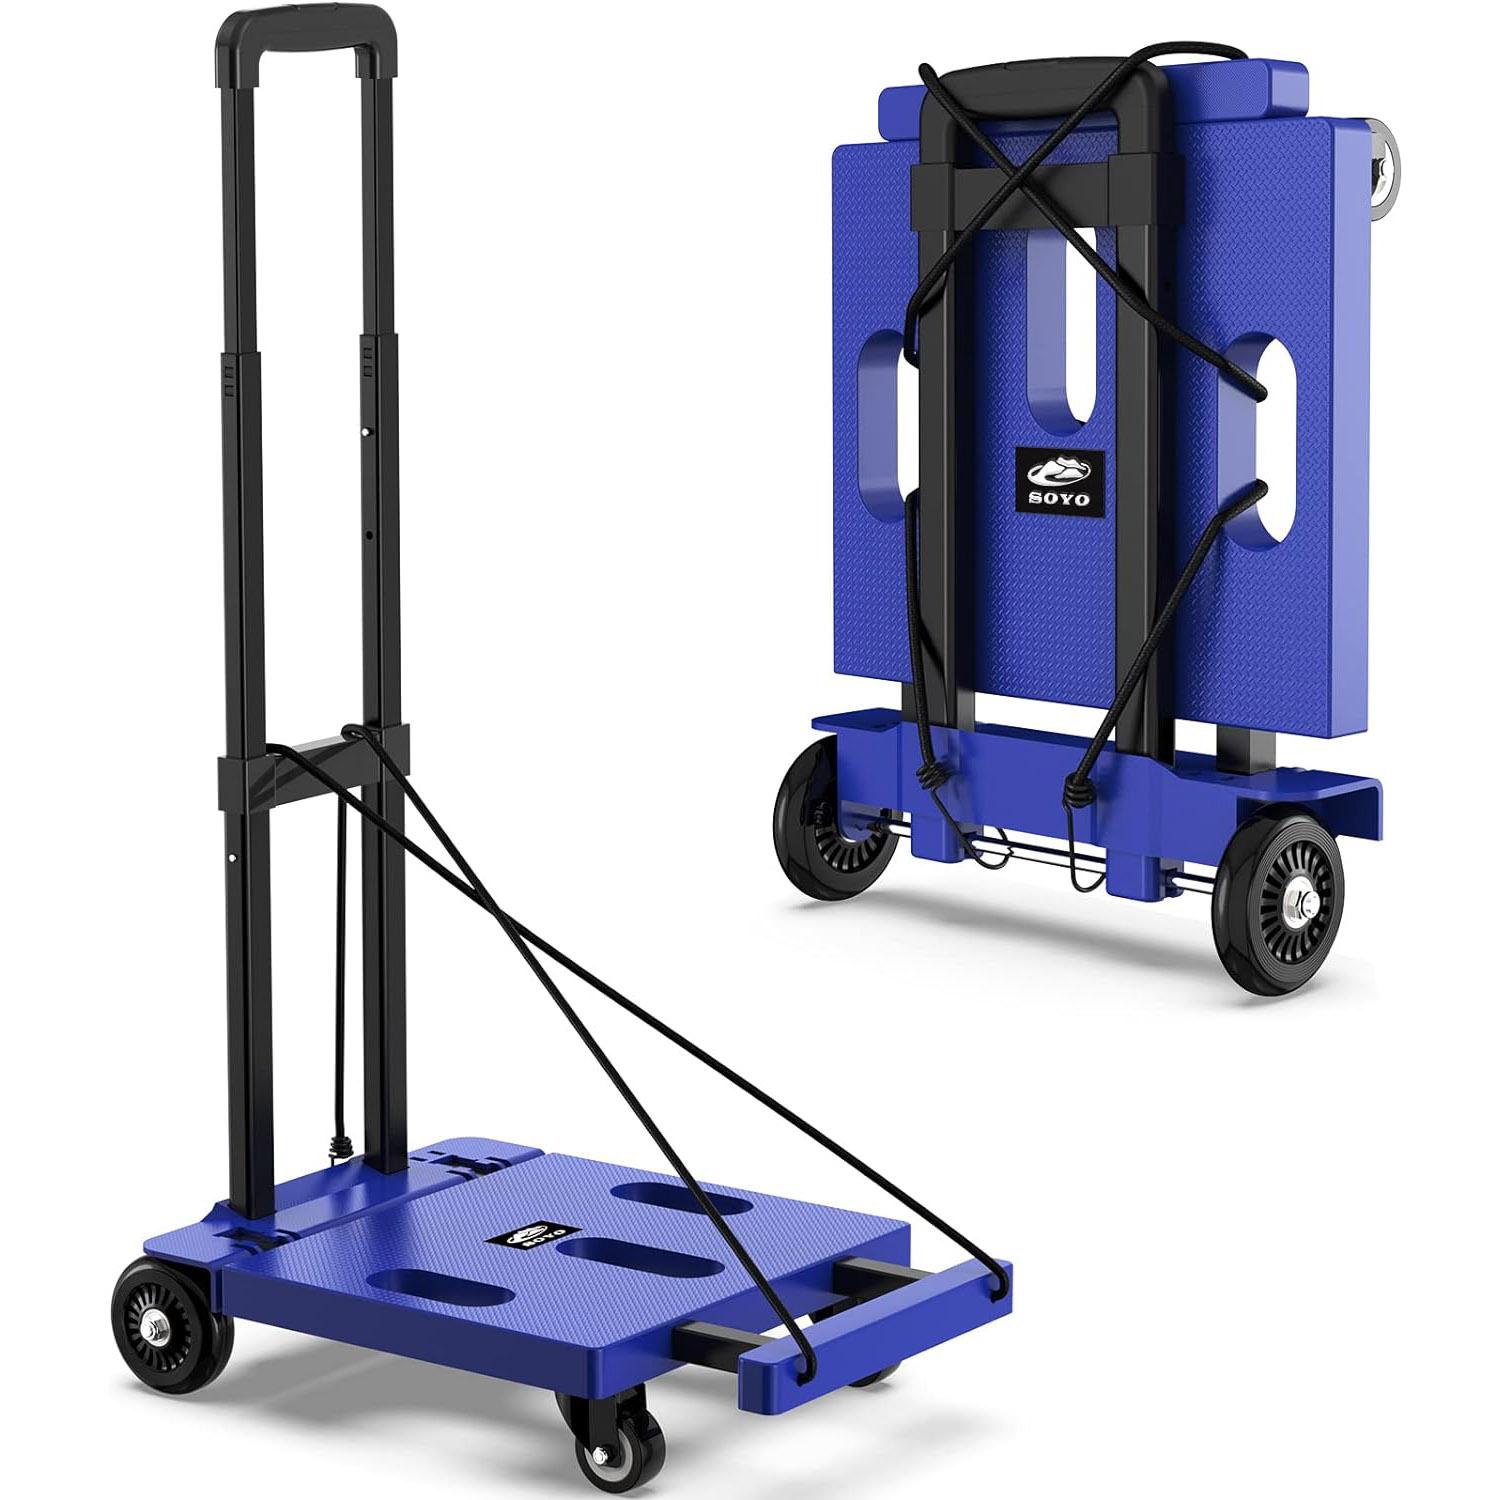 Folding Hand Truck Dolly Cart for $28.99